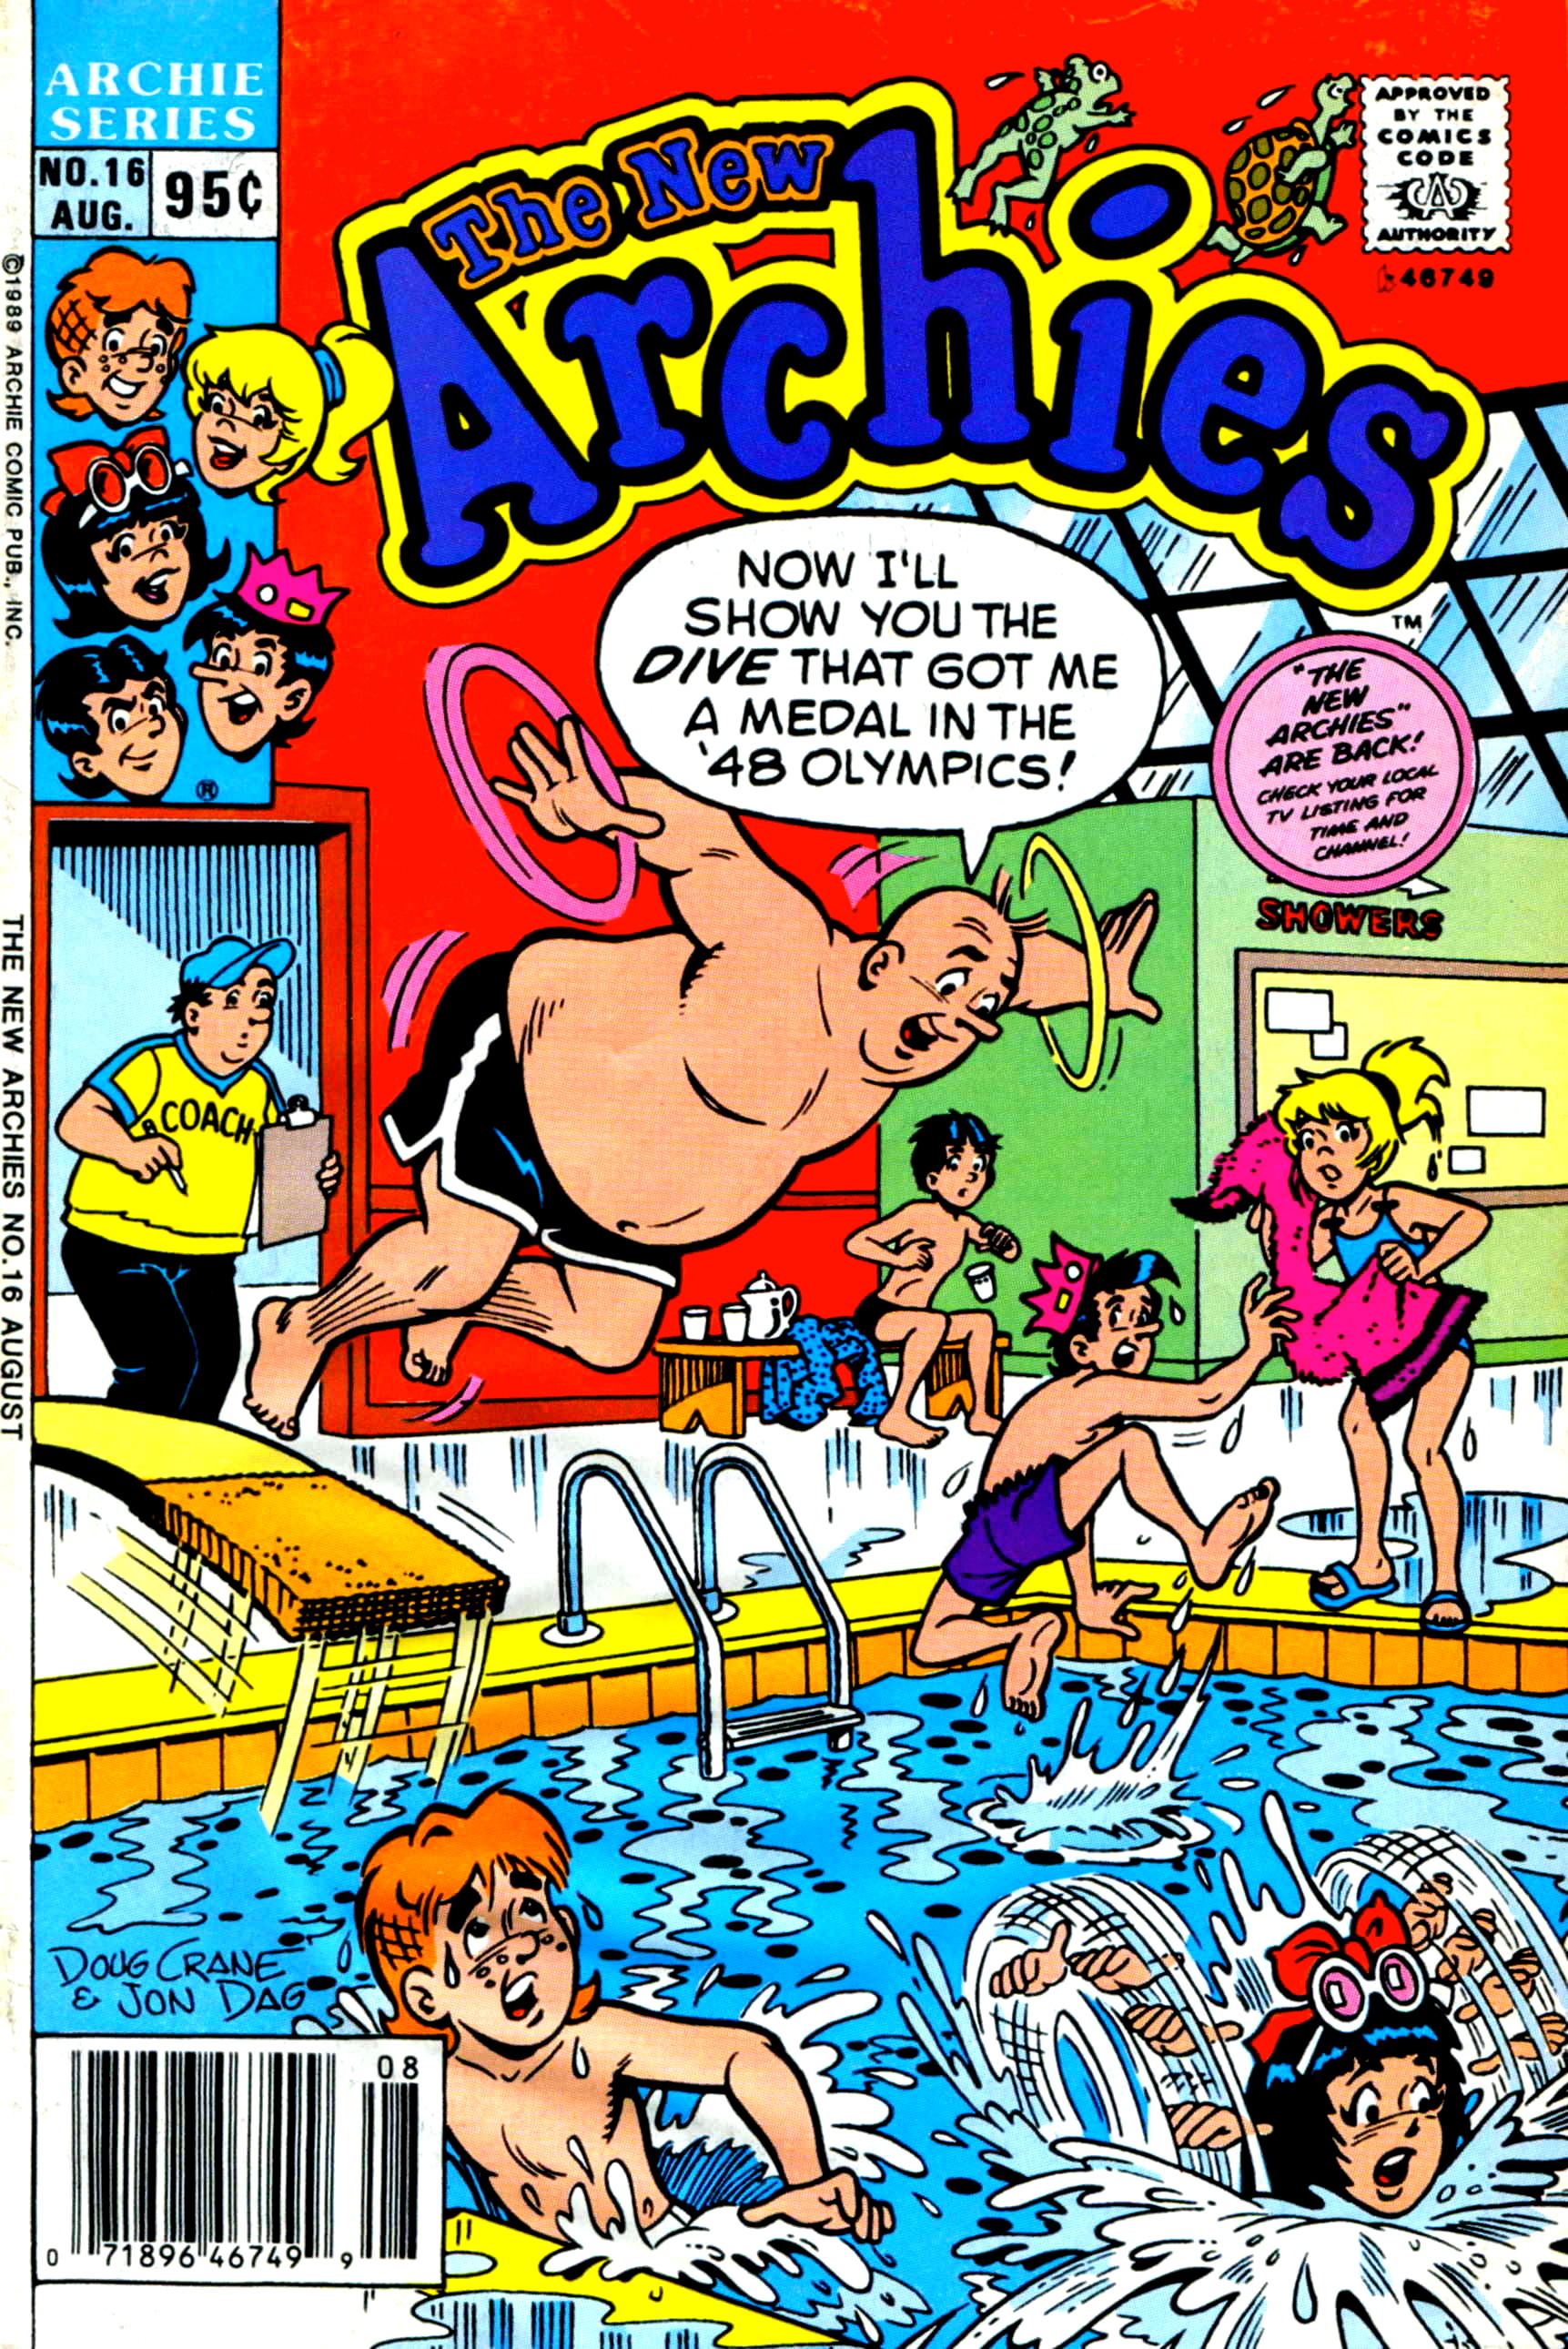 Read online The New Archies comic -  Issue #16 - 1